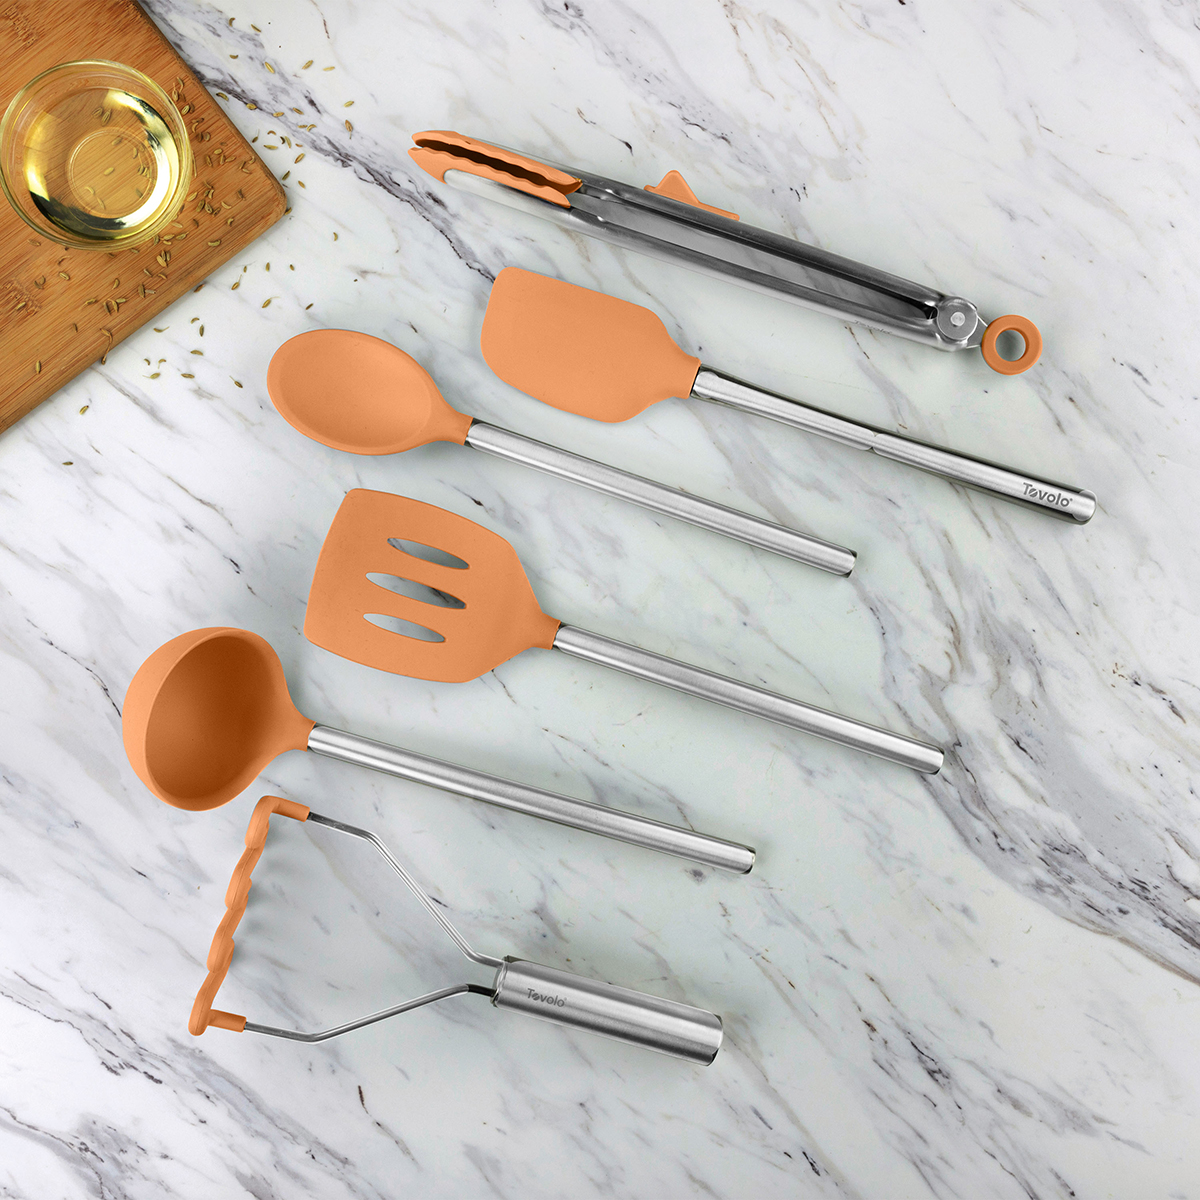 https://www.containerstore.com/catalogimages/514578/10098743_Silicone-Utensil-Set_Aprico.jpg